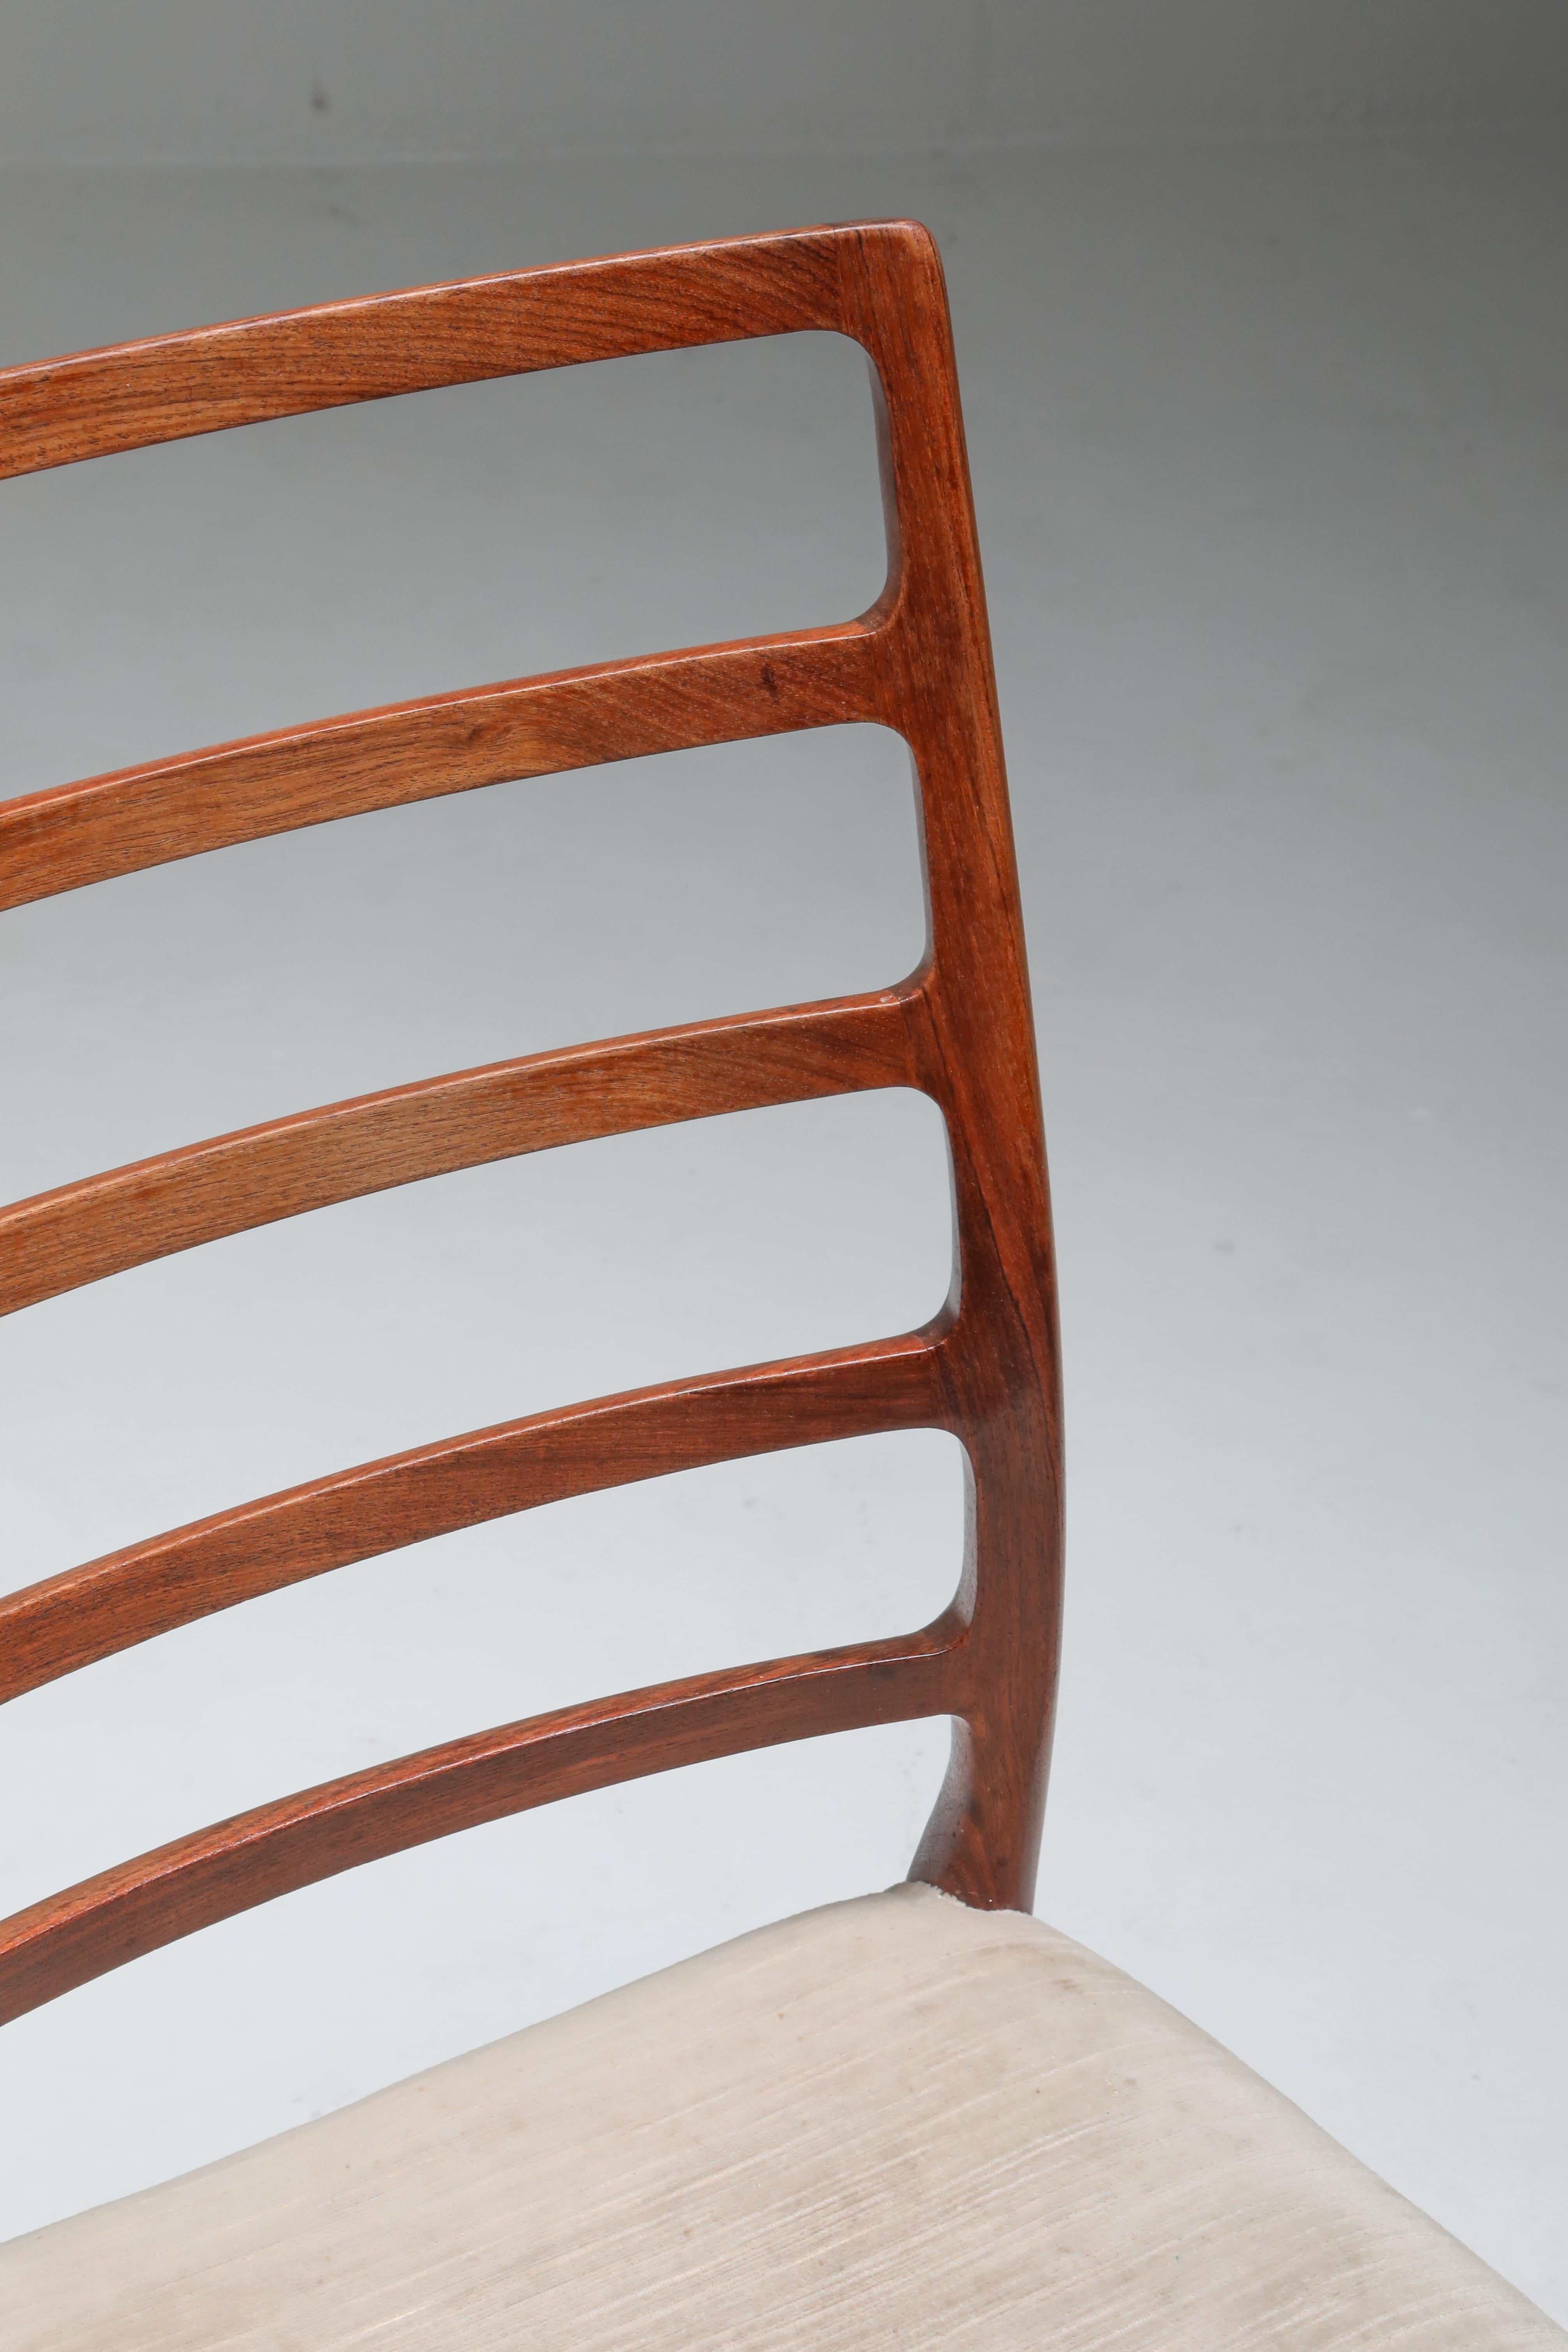 Danish Rosewood Dining Chairs, circa 1970 by Niels Møller 7